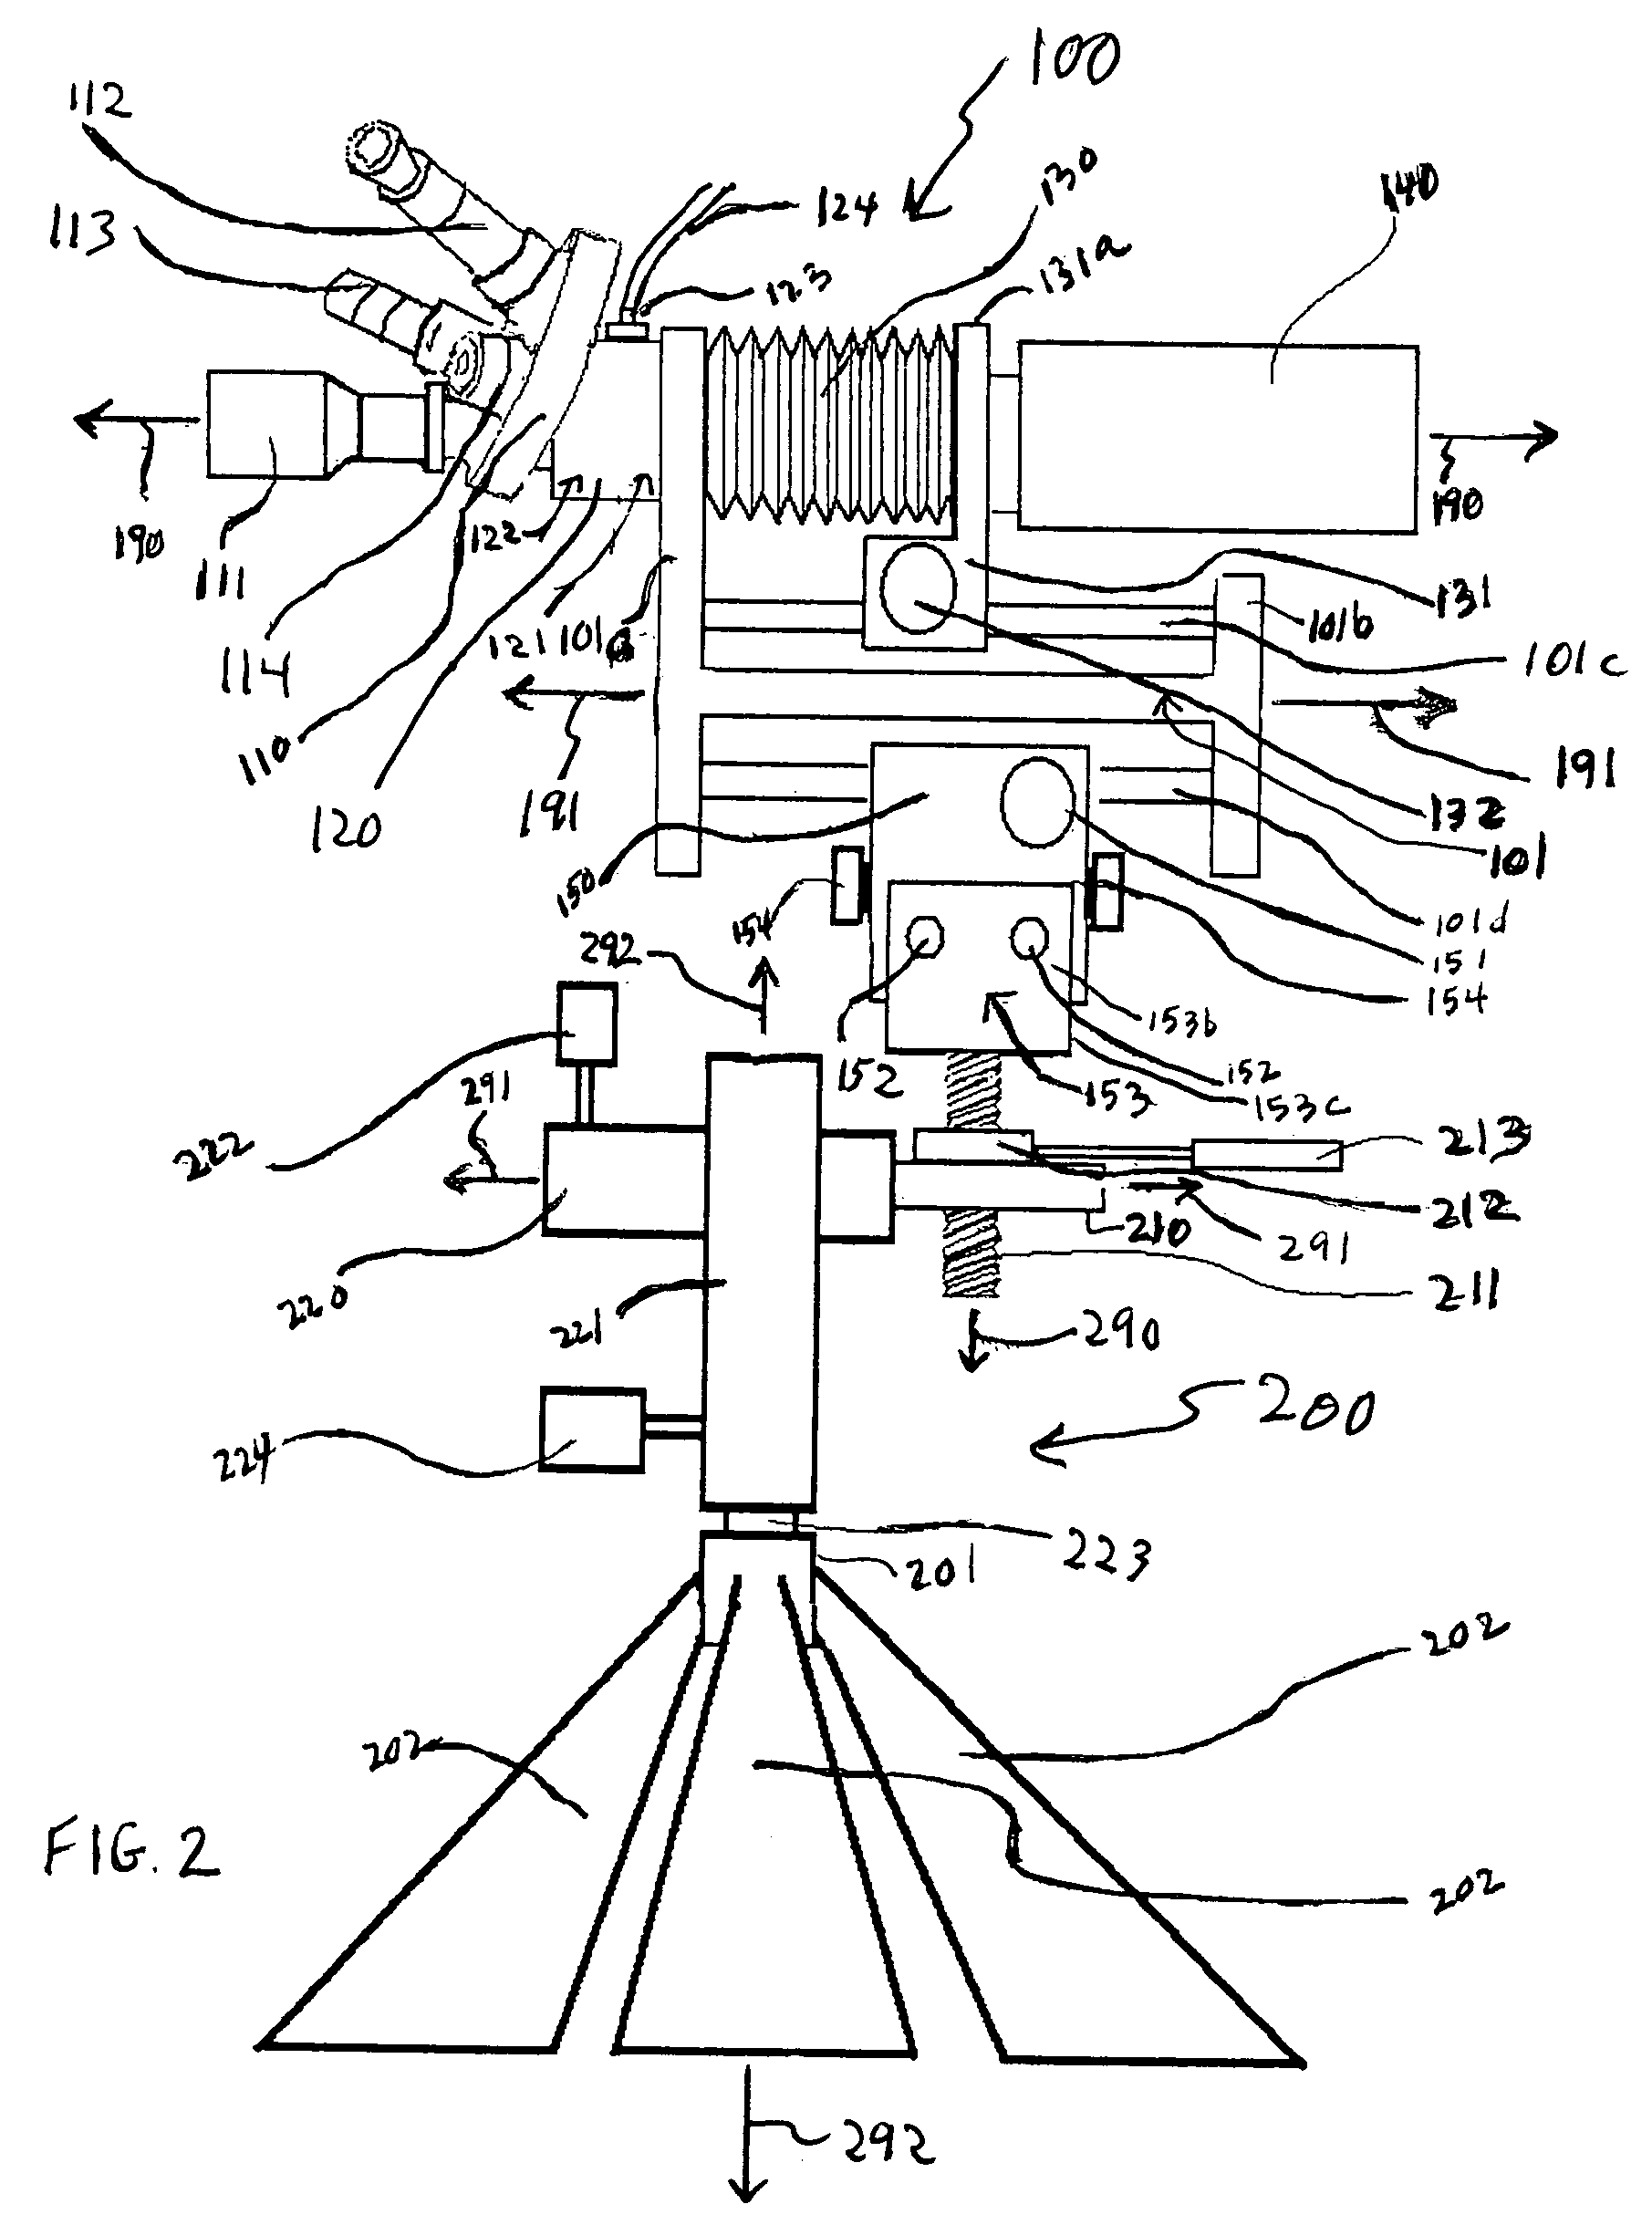 Microscope with objective lens position control apparatus